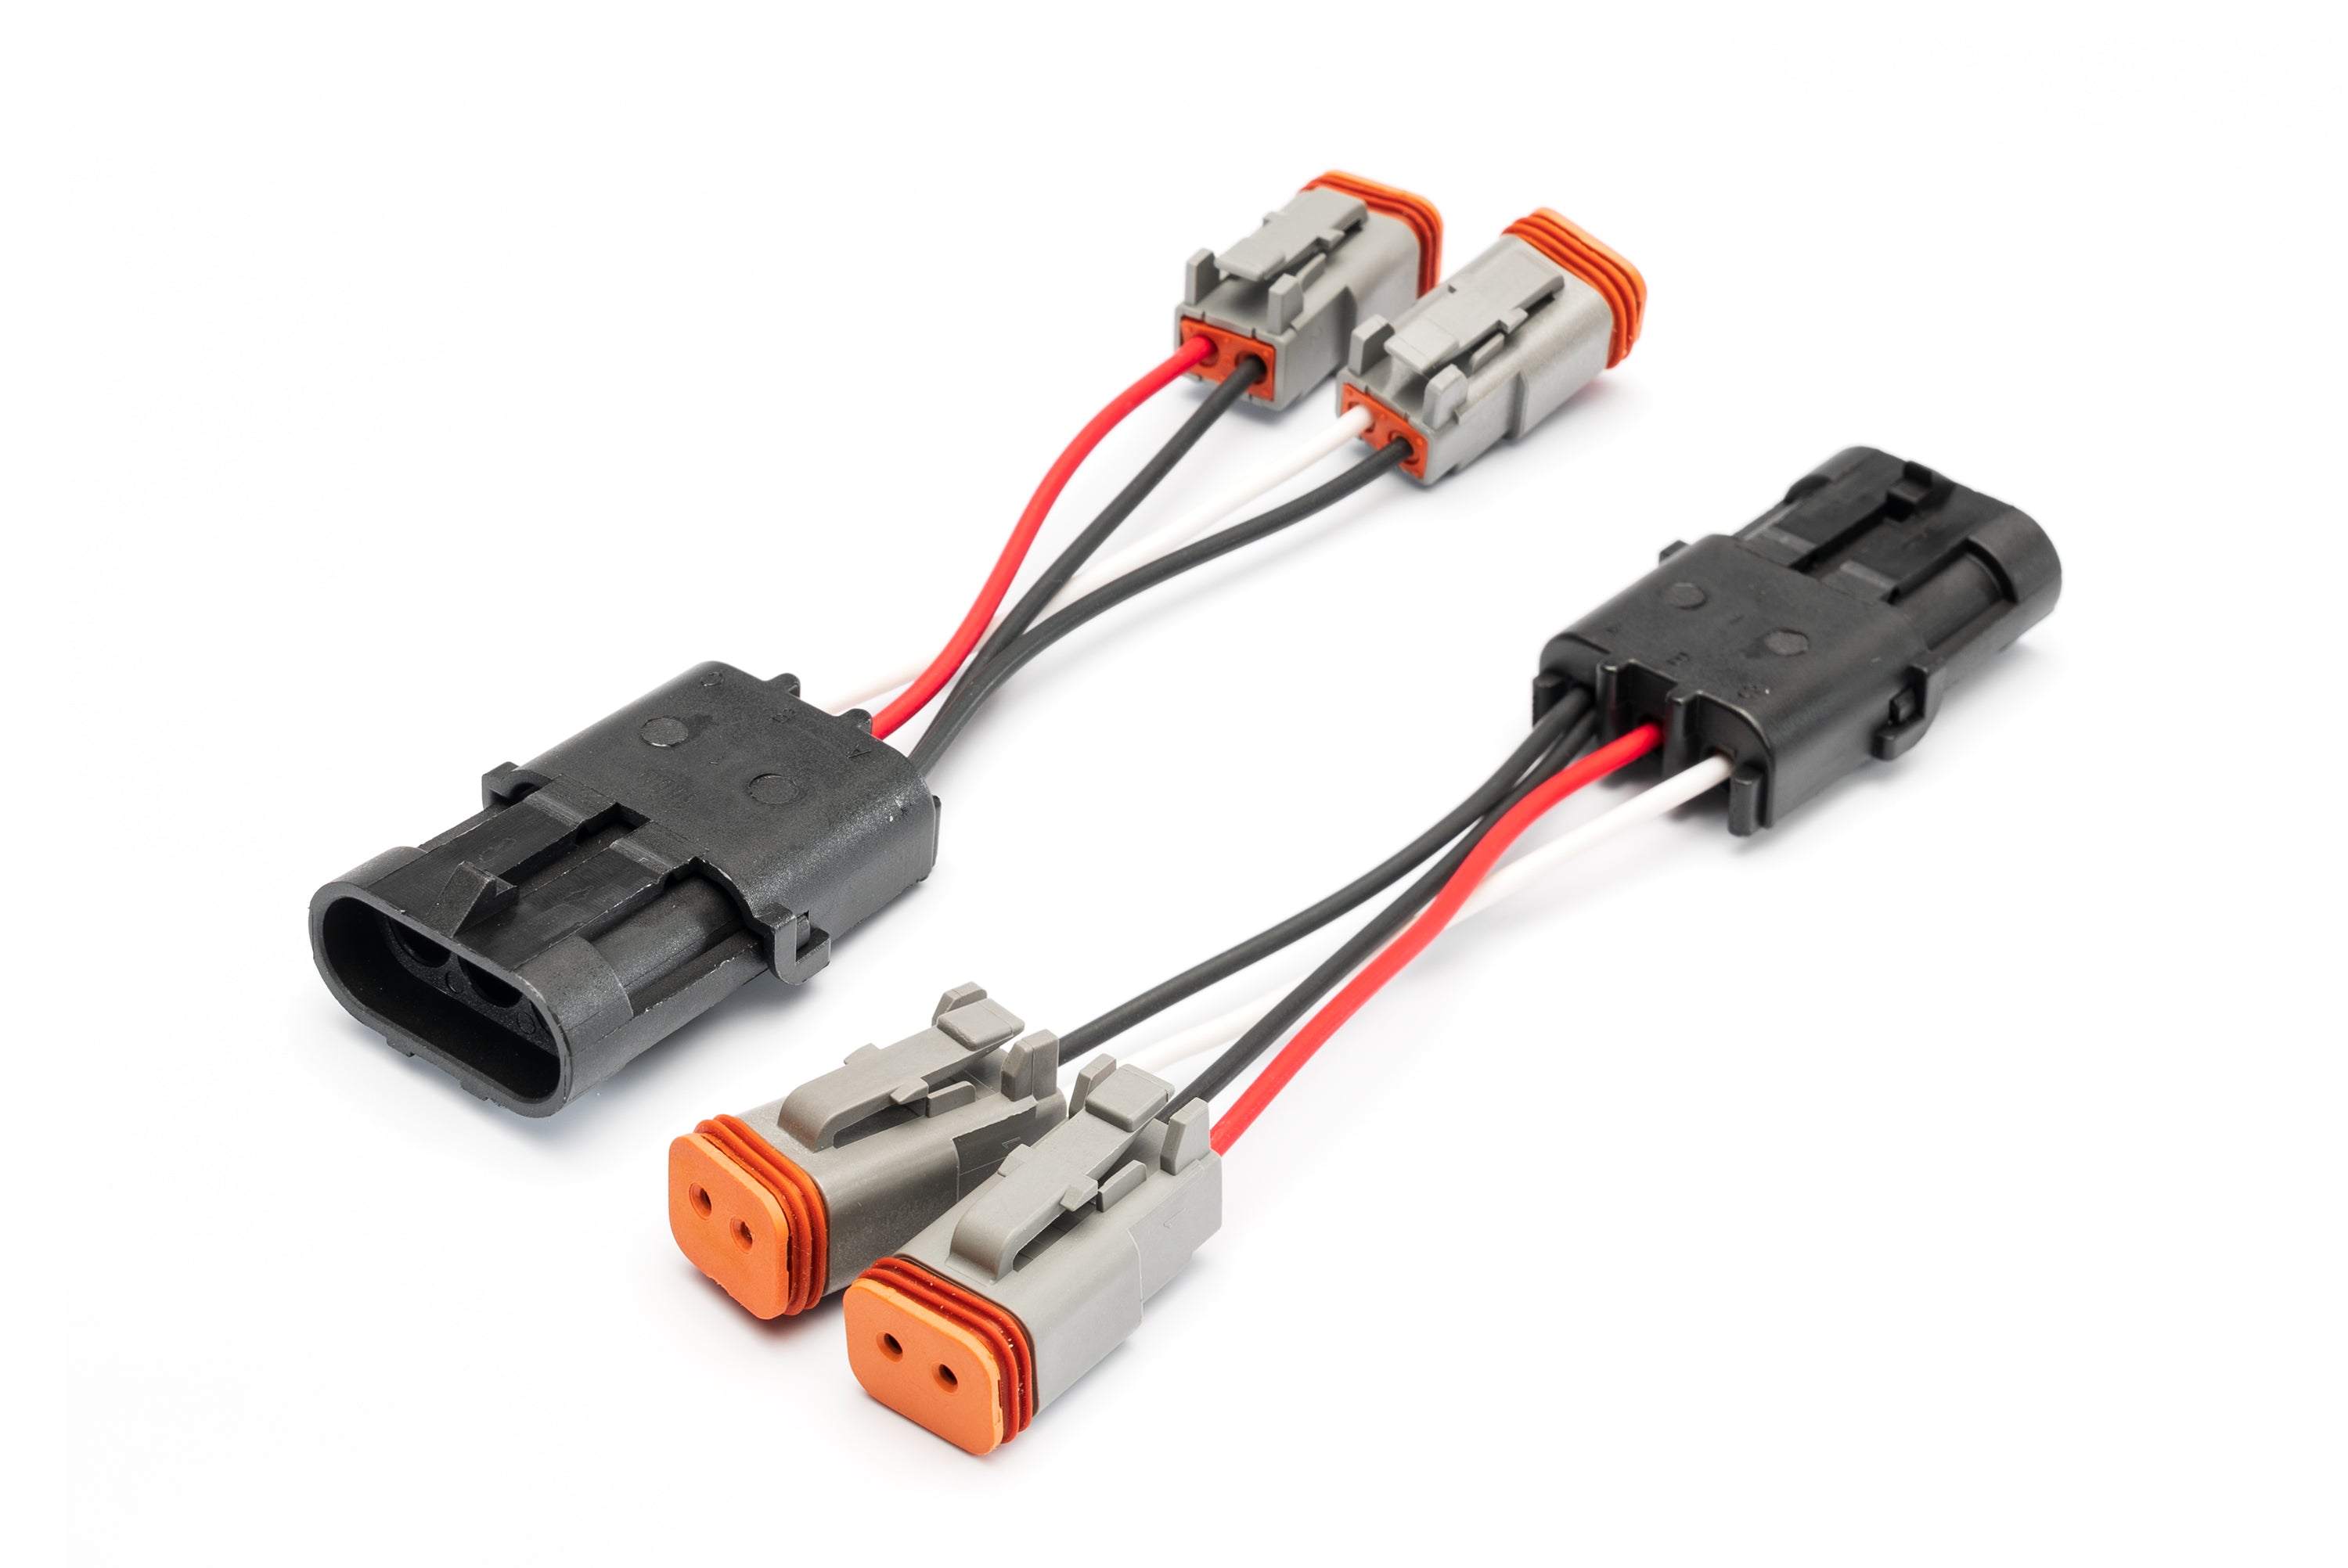 SPV Parts Harness 2-way DT Connector CROSSOVER Adapter SPLITTERS (Pair) - SPV Harness System (Works with MANY vehicles, See Details)